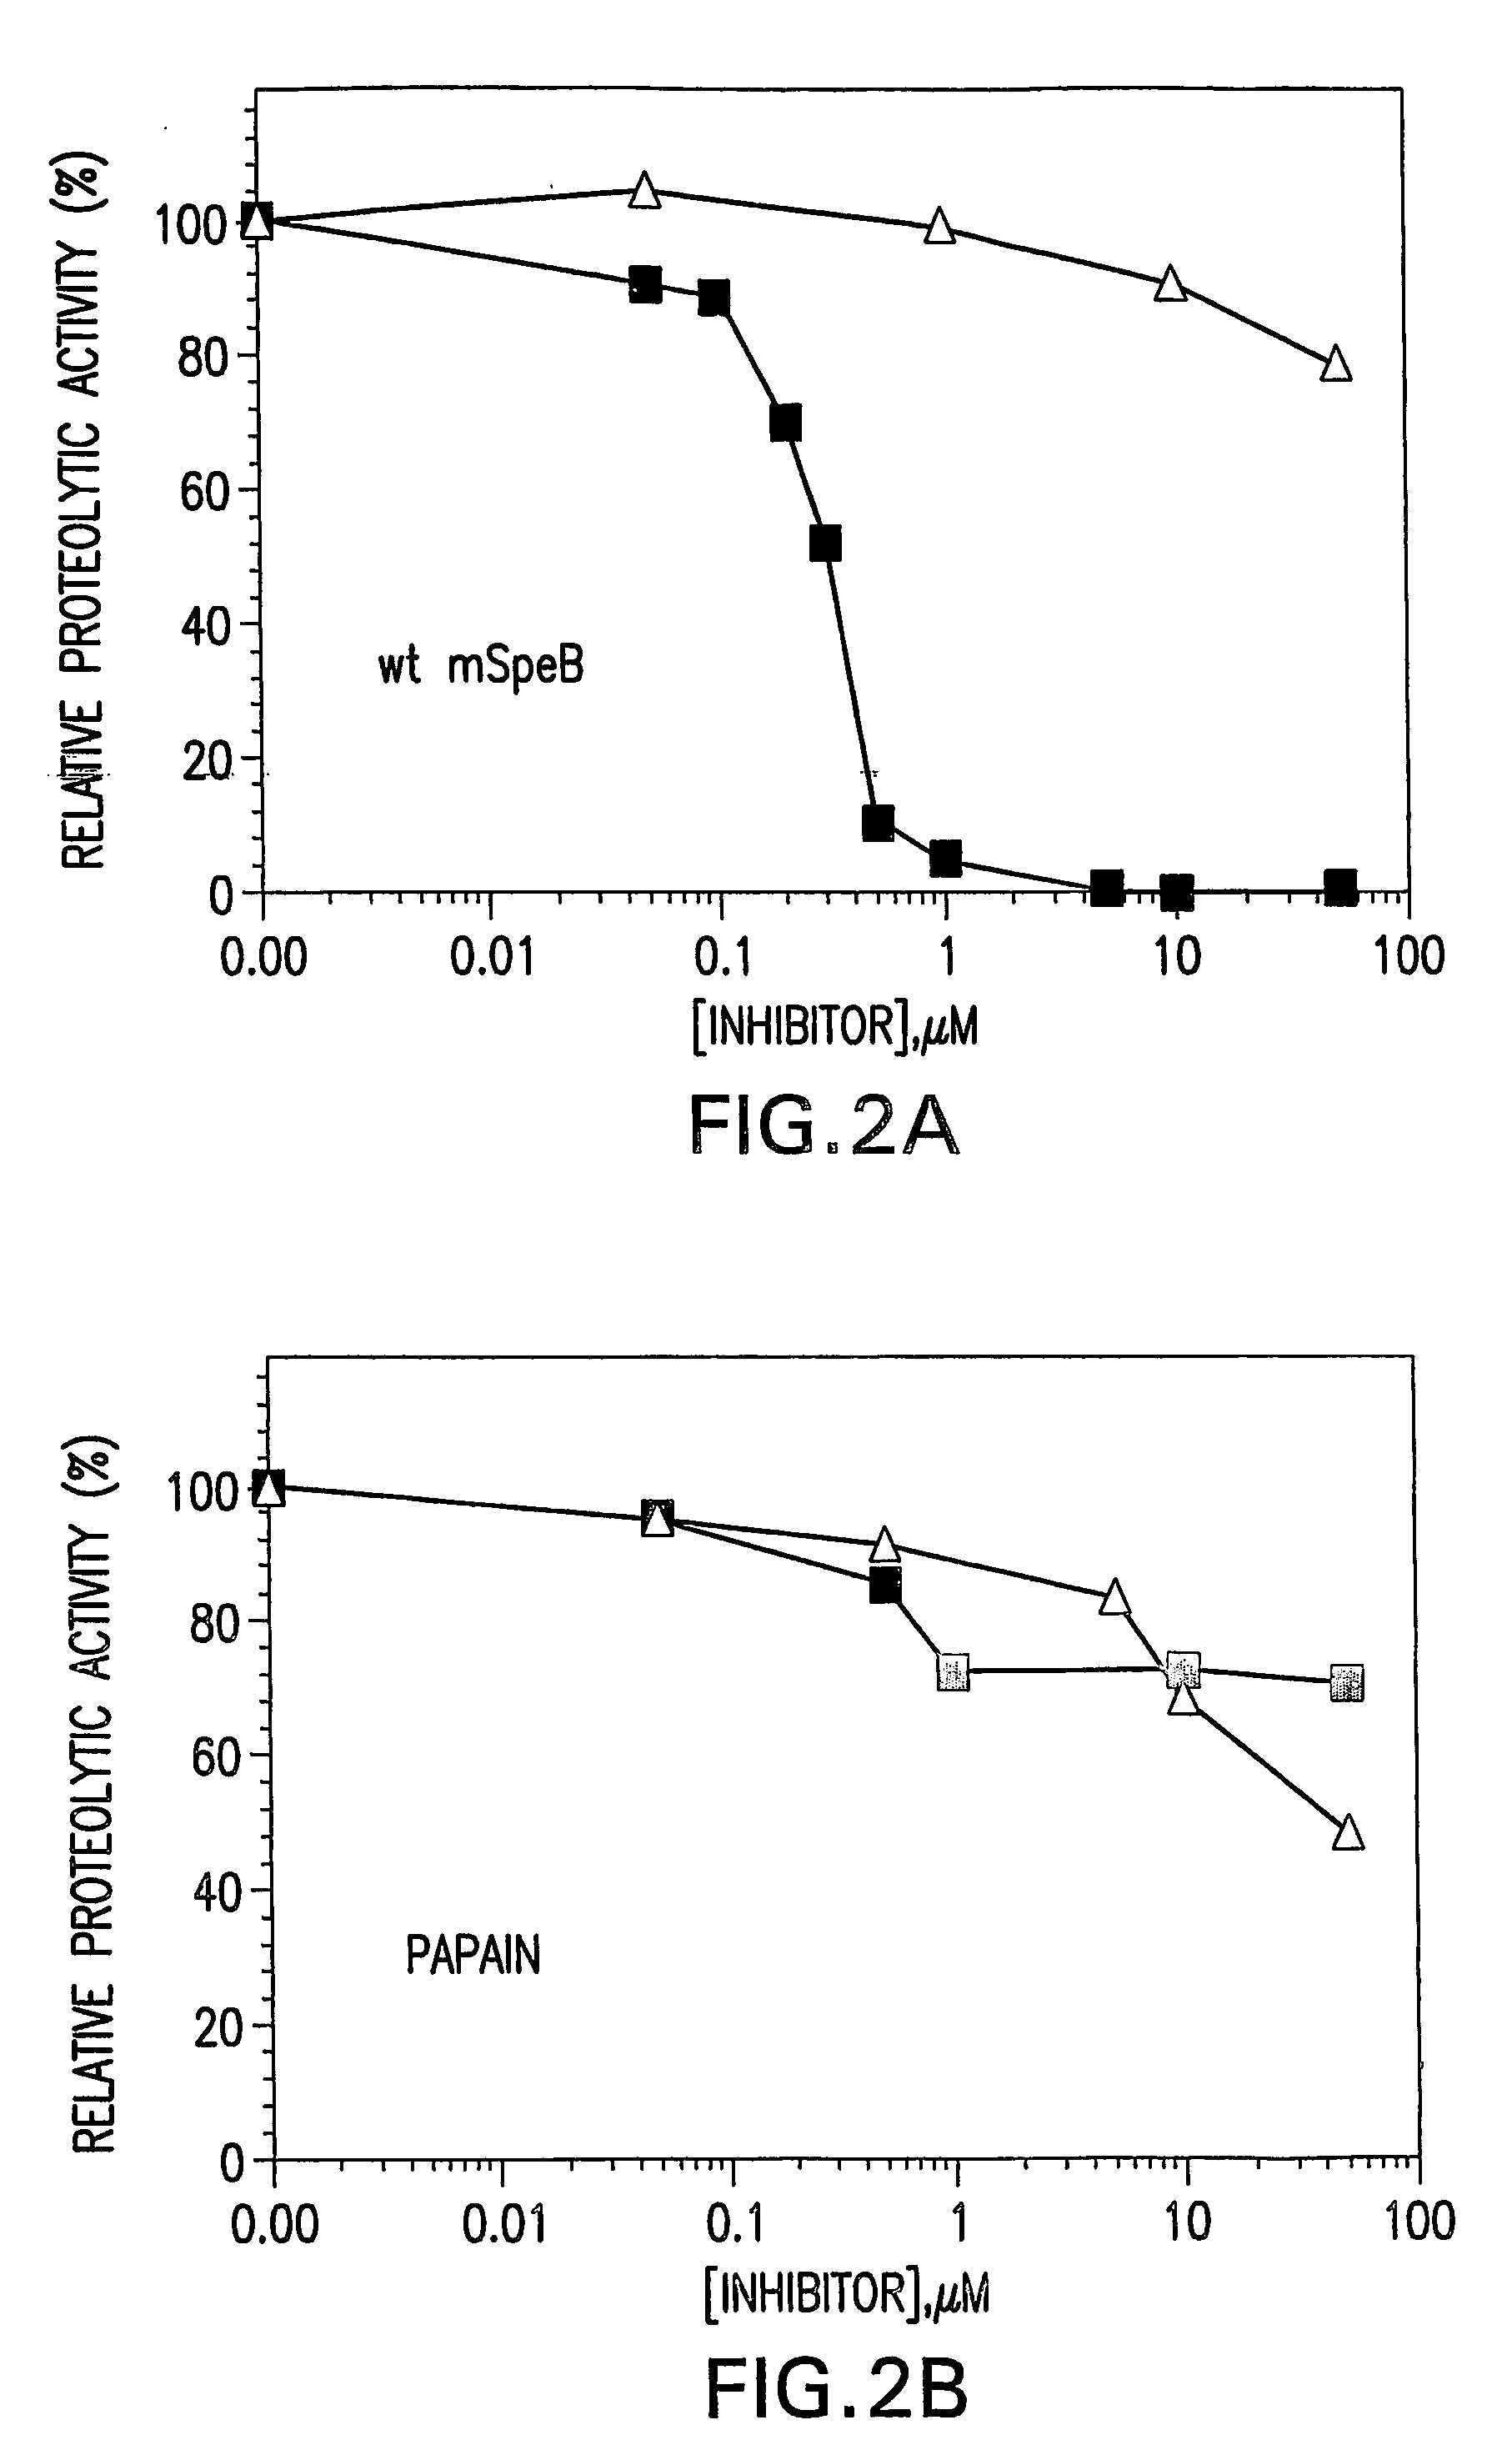 Recombinant expression of streptococcus pyogenes cysteine protease and immunogenic compositions thereof